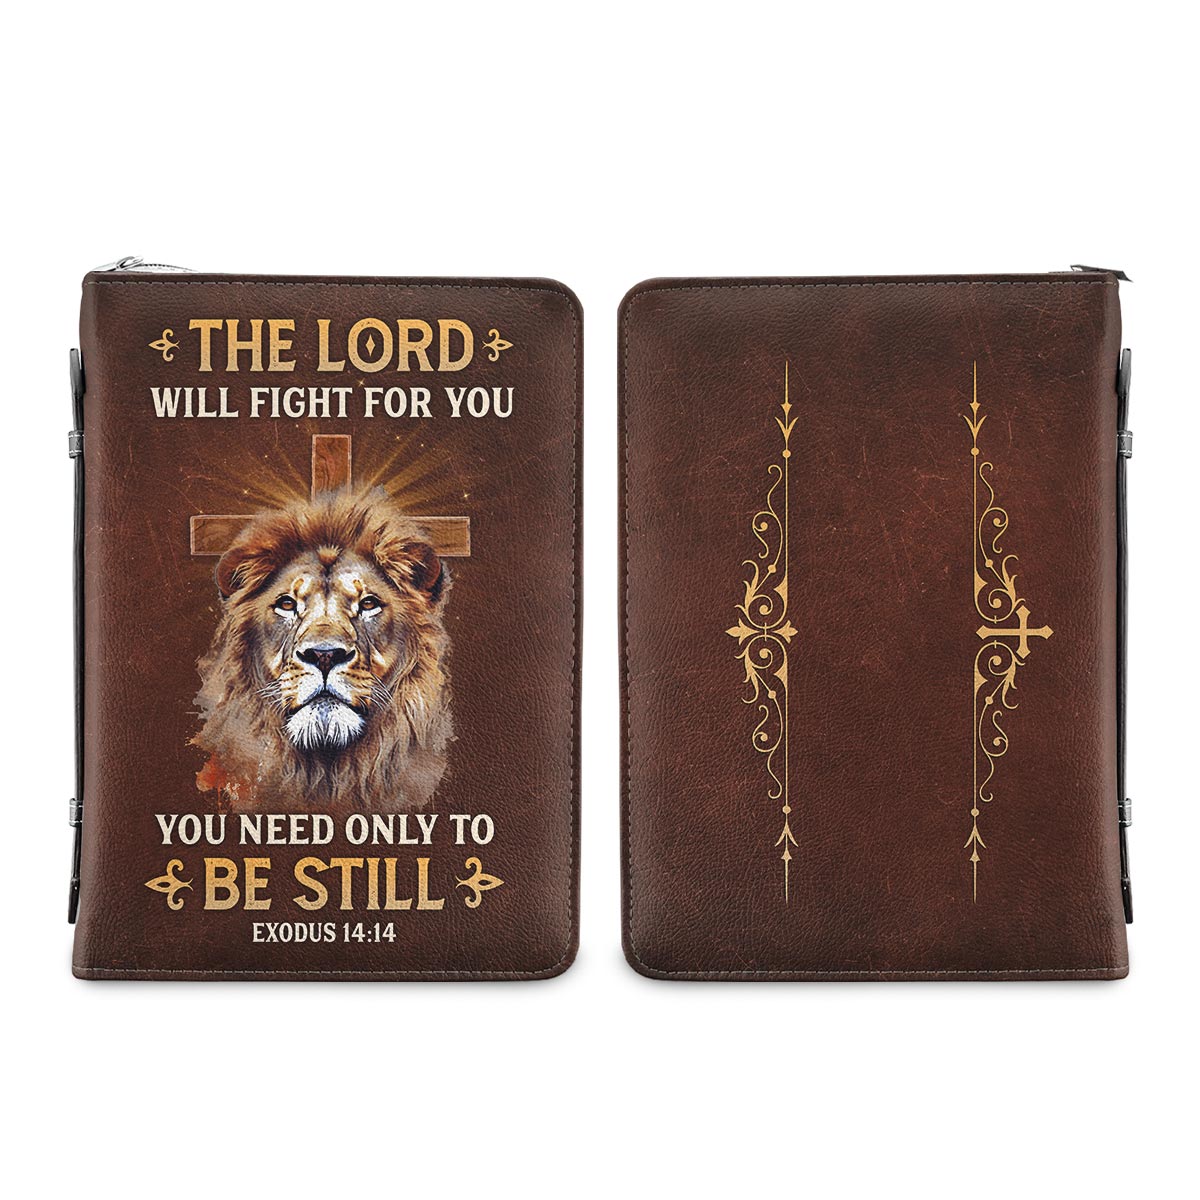 The Lord Will Fight For You You Need Only To Be Still Exodus 1414 Personalized Bible Cover - Christian Bible Covers For Women